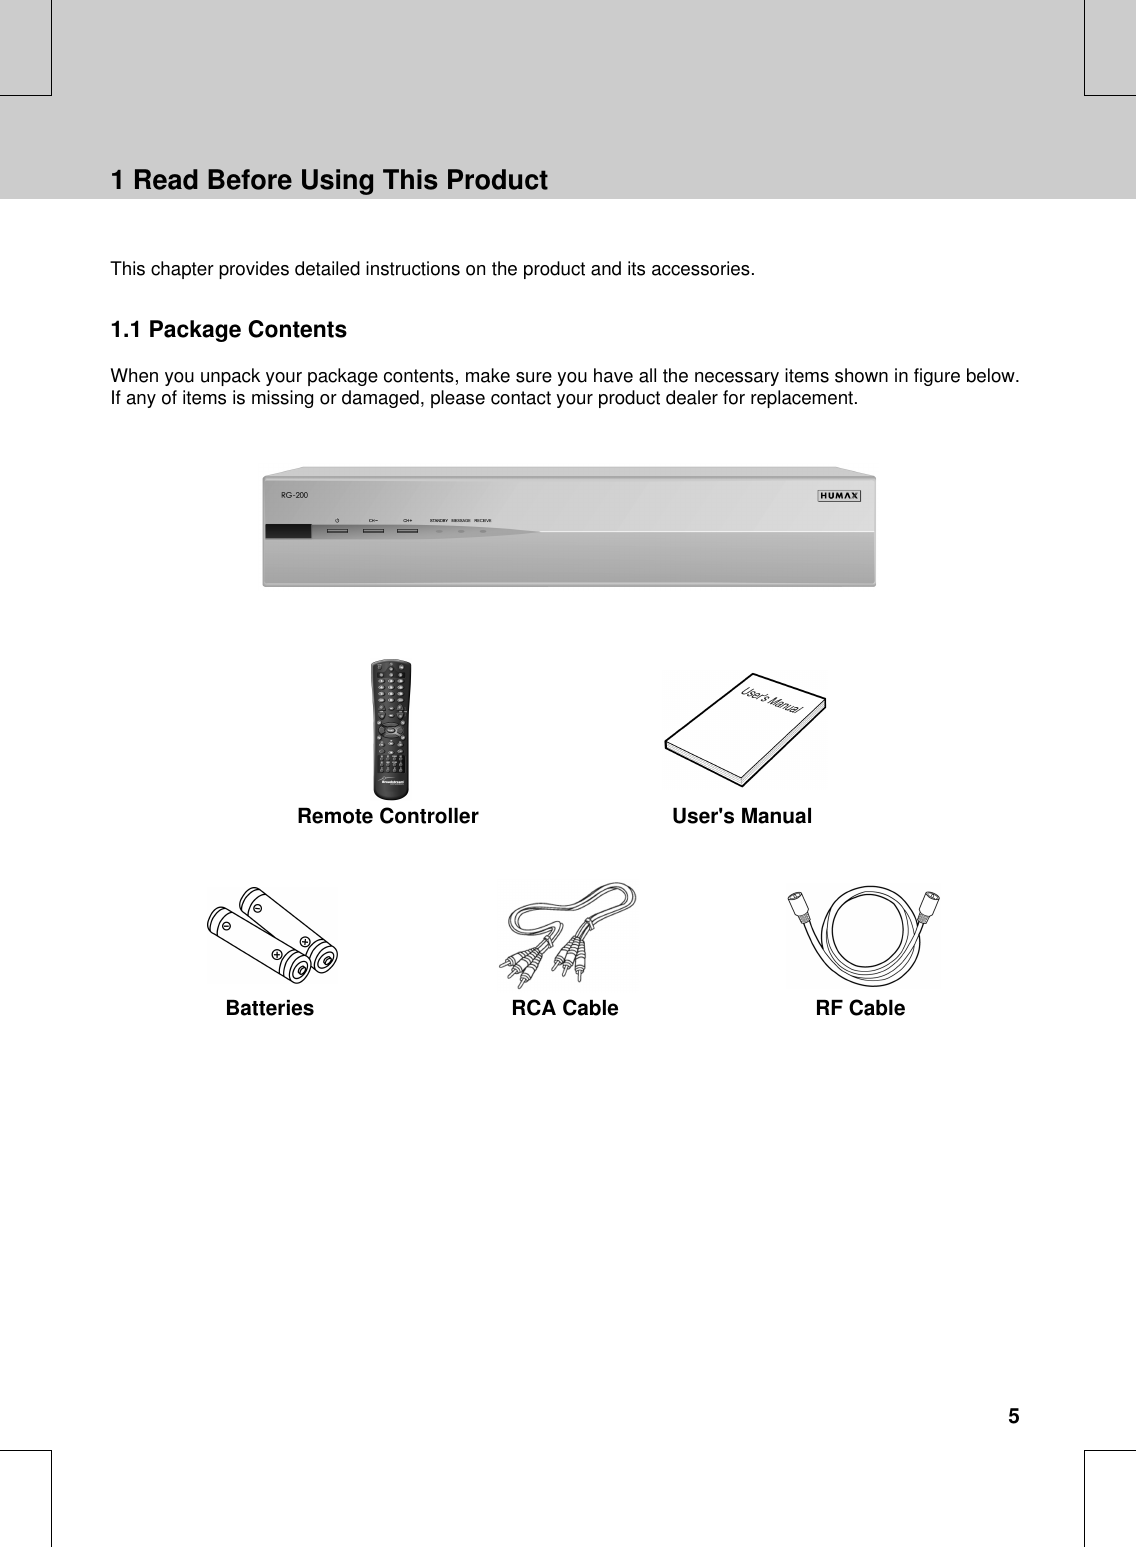 **This chapter provides detailed instructions on the product and its accessories.**1.1 Package ContentsWhen you unpack your package contents, make sure you have all the necessary items shown in figure below.If any of items is missing or damaged, please contact your product dealer for replacement.****Remote Controller User&apos;s Manual**Batteries RCA Cable RF Cable**1 Read Before Using This Product5****************************